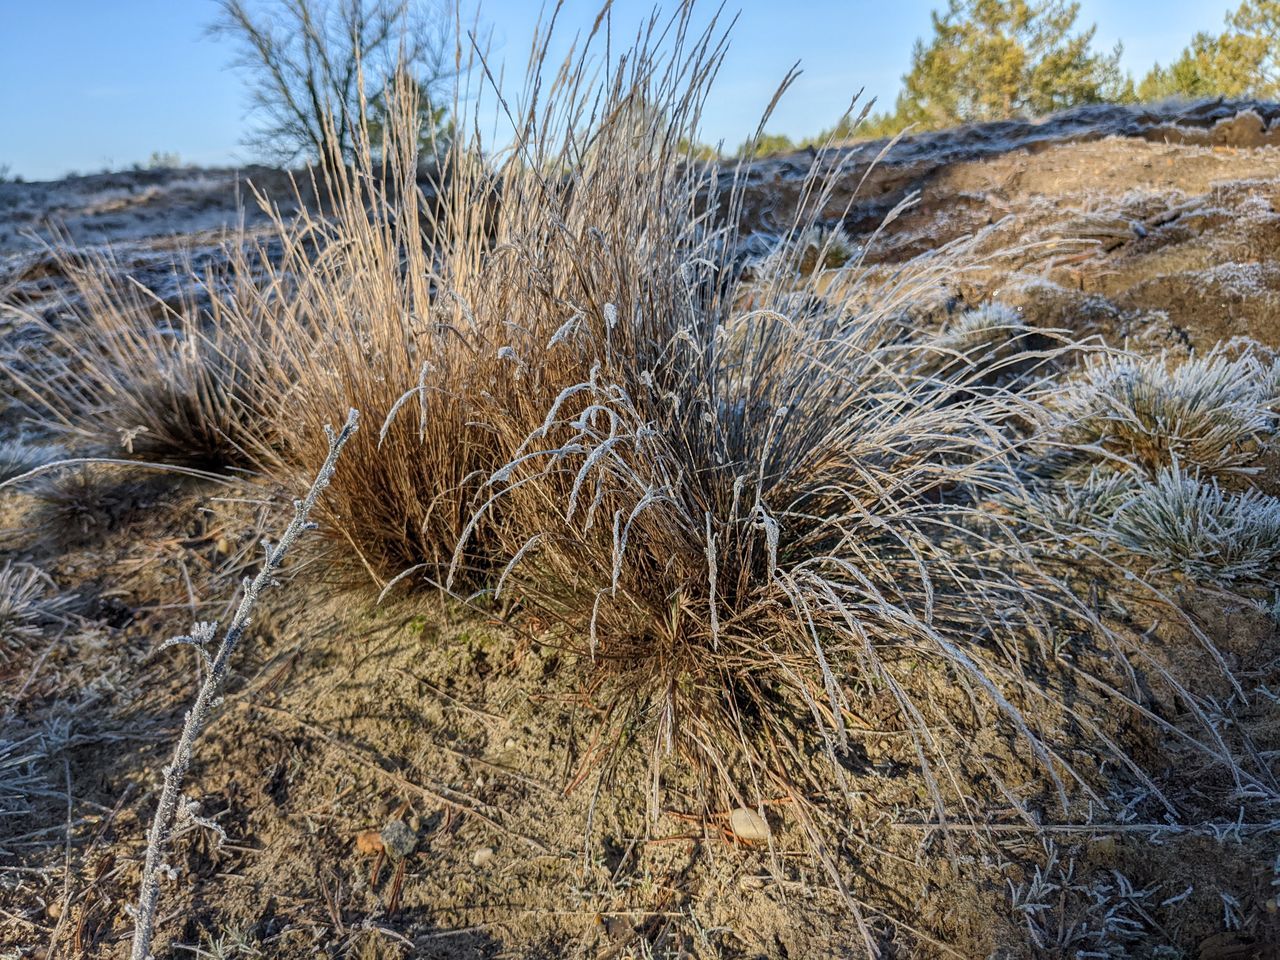 grass, plant, tree, winter, nature, frost, land, no people, natural environment, sky, prairie, wilderness, landscape, environment, day, tranquility, growth, beauty in nature, scenics - nature, dry, desert, outdoors, non-urban scene, snow, clear sky, cold temperature, field, tranquil scene, wetland, soil, sand